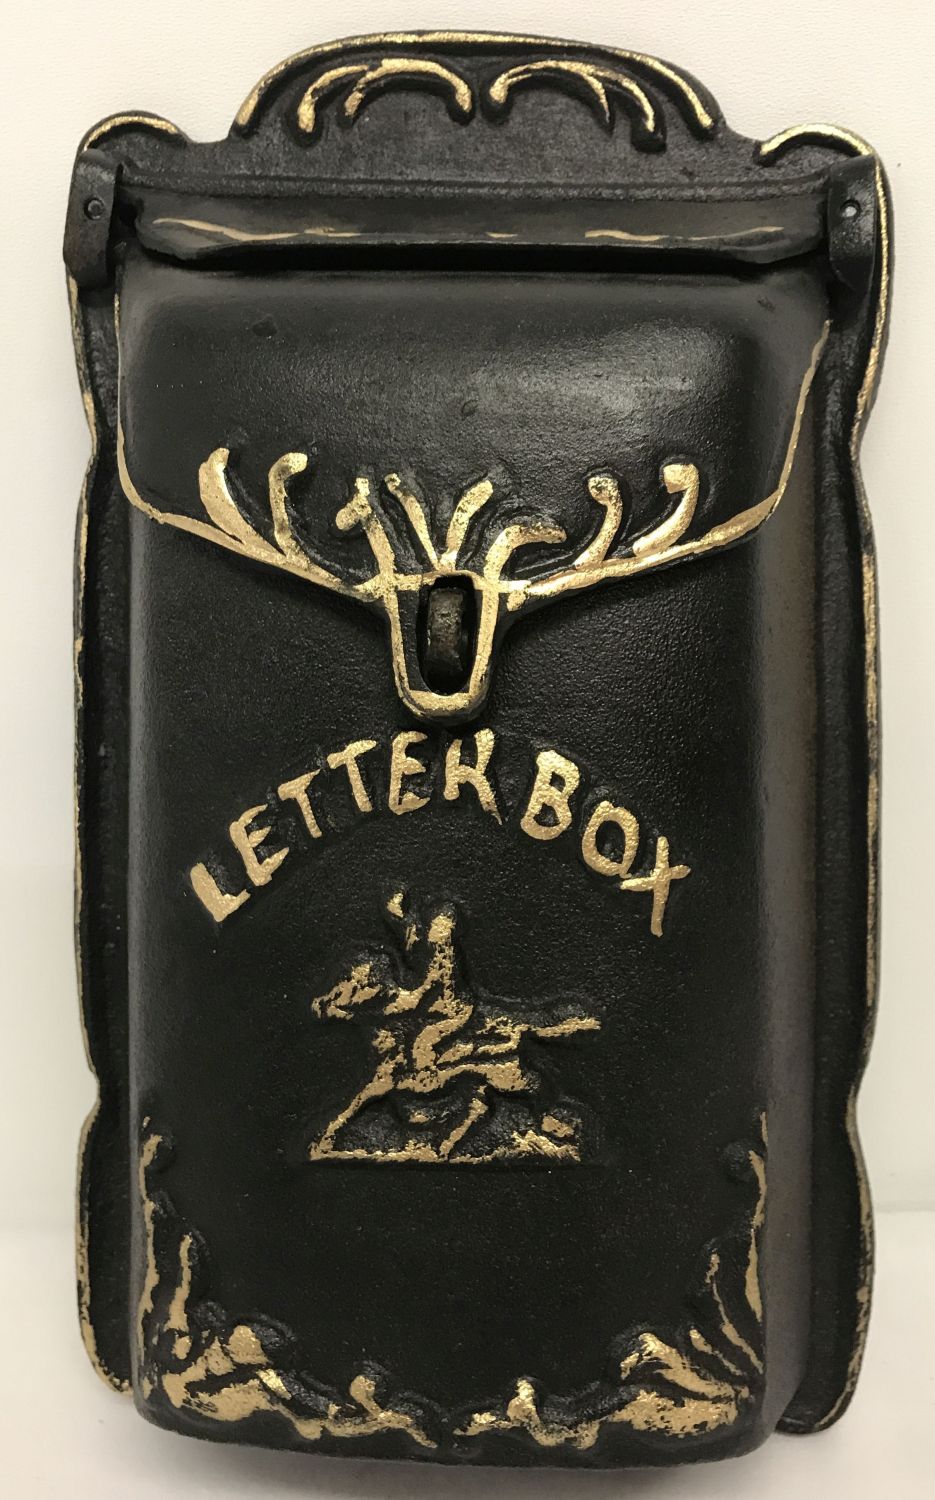 A cast metal wall hanging letter box, painted black with gold detailing and hinged opening lid.